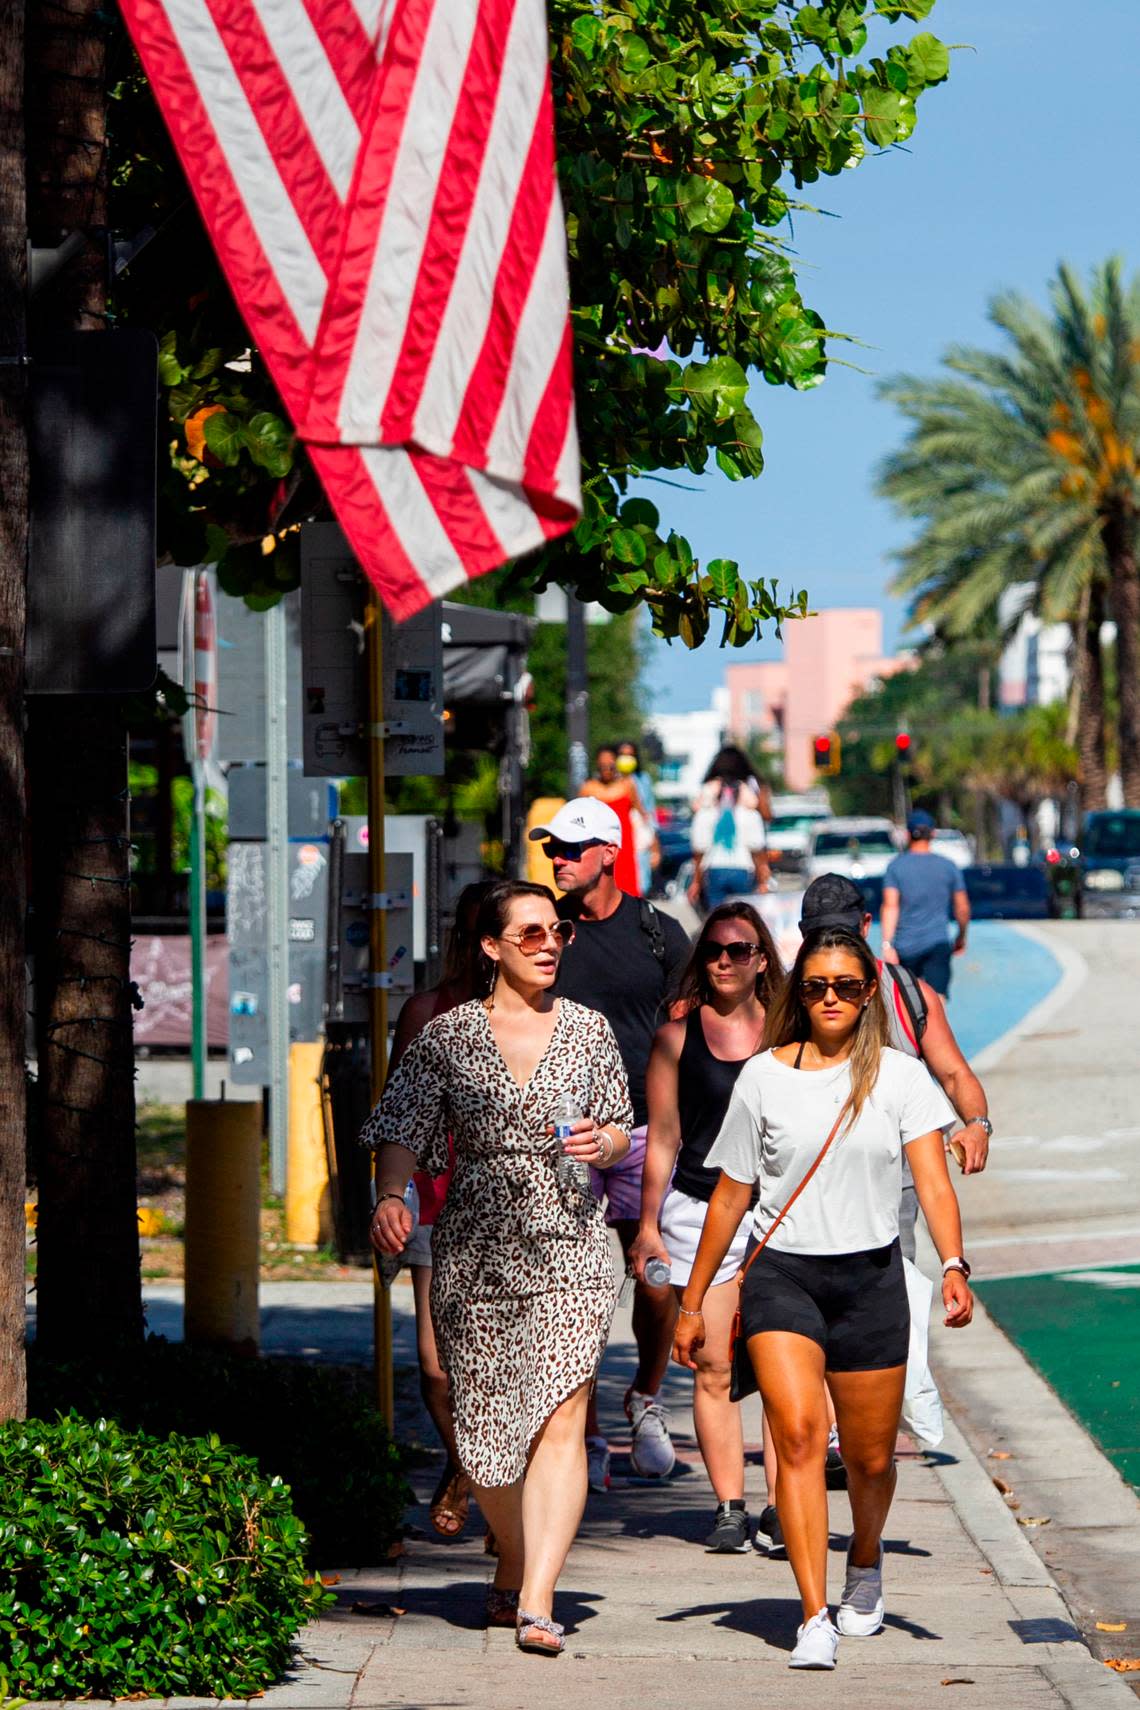 Downtown Fort Lauderdale saw a 14% uptick in pedestrian foot traffic between 2018 and 2022, based on data from the Las Olas Boulevard Association and the Fort Lauderdale Downtown Development Authority’s latest retail market report 2023.